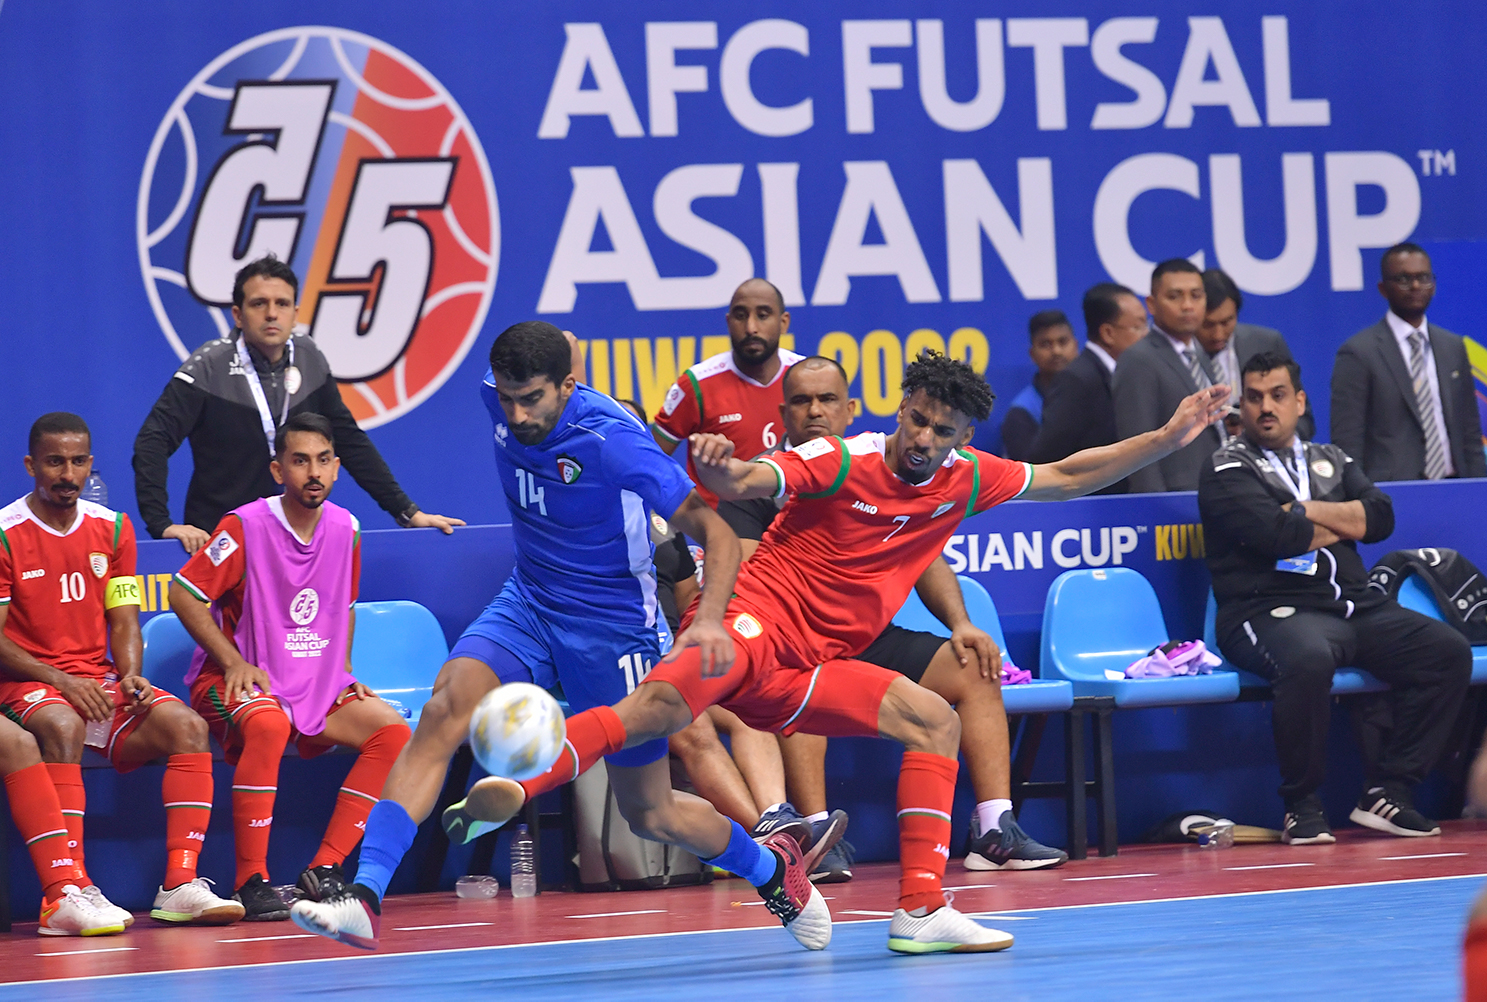 Hosts Kuwait thrashed Oman, 7-2, in the opening match of the 2022 AFC Futsal Asian Cup